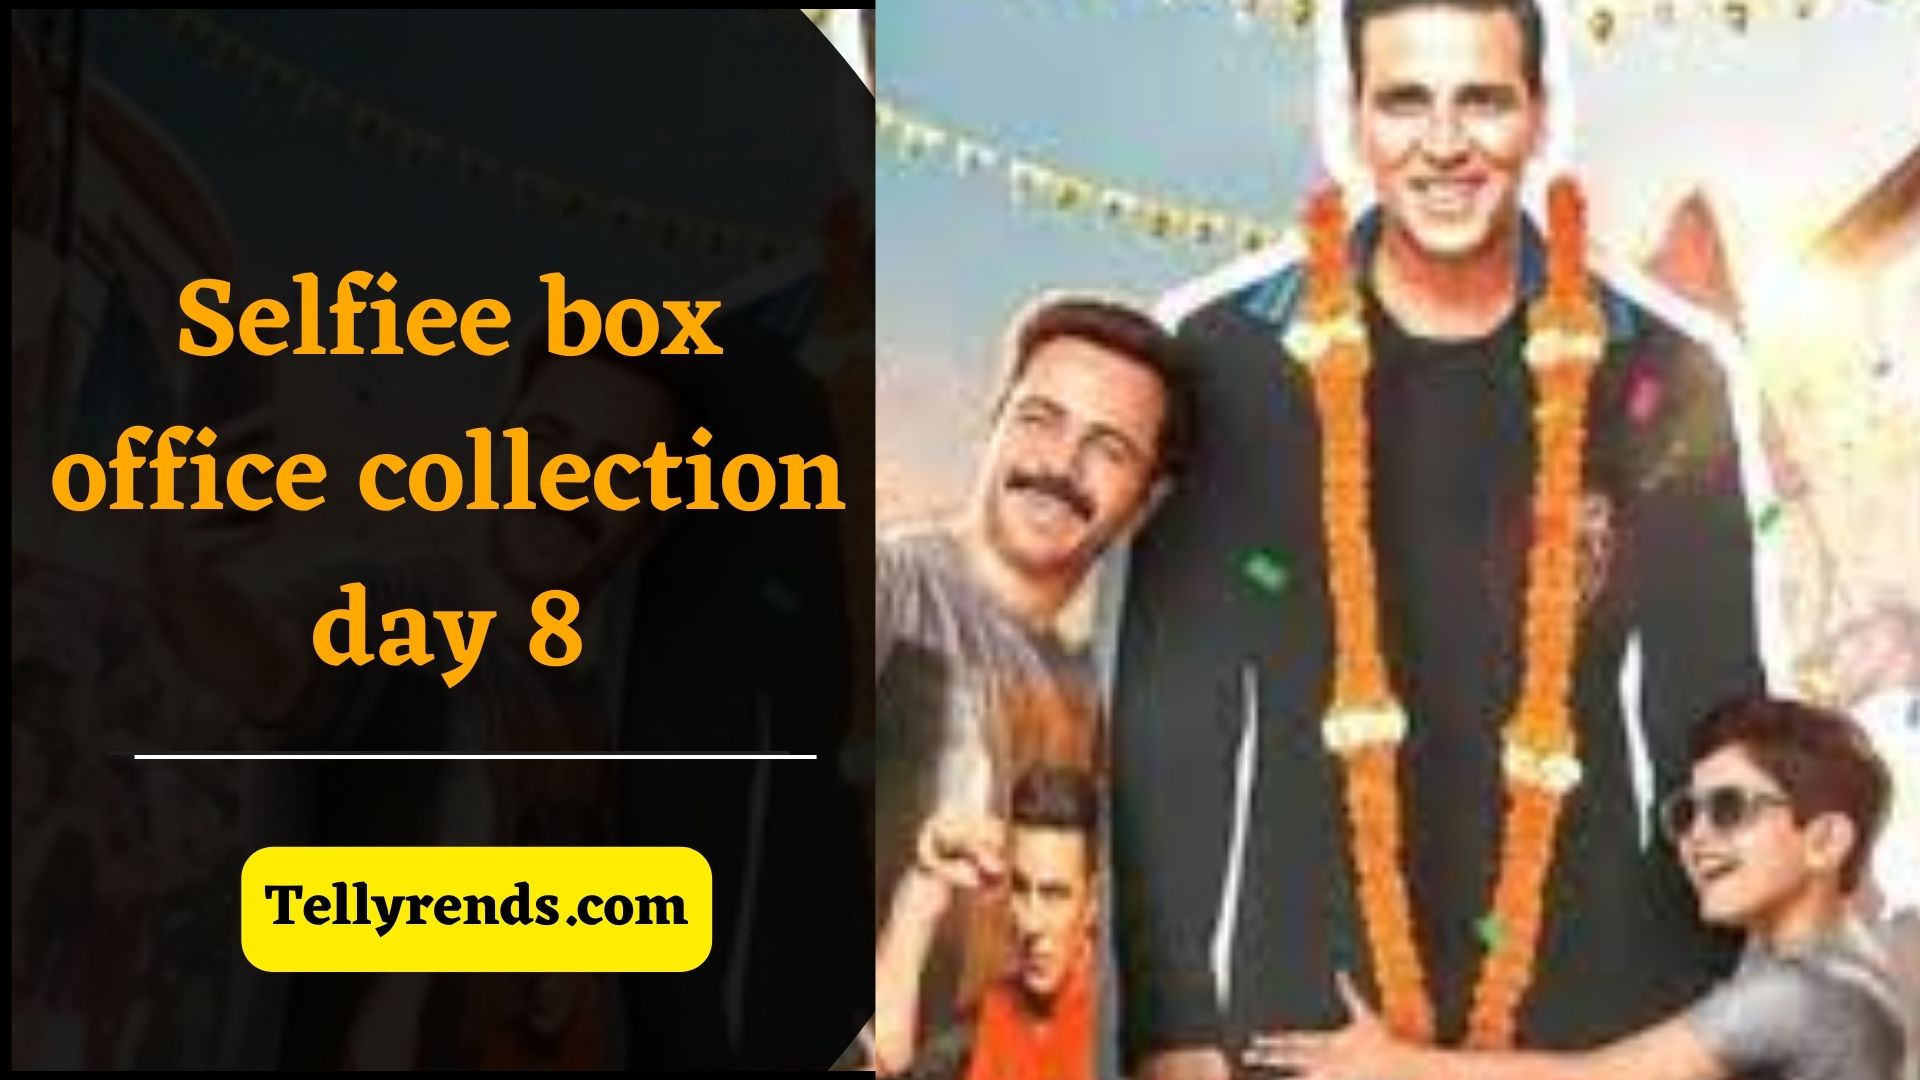 Selfiee box office collection day 8: अक्षय कुमार की फिल्म